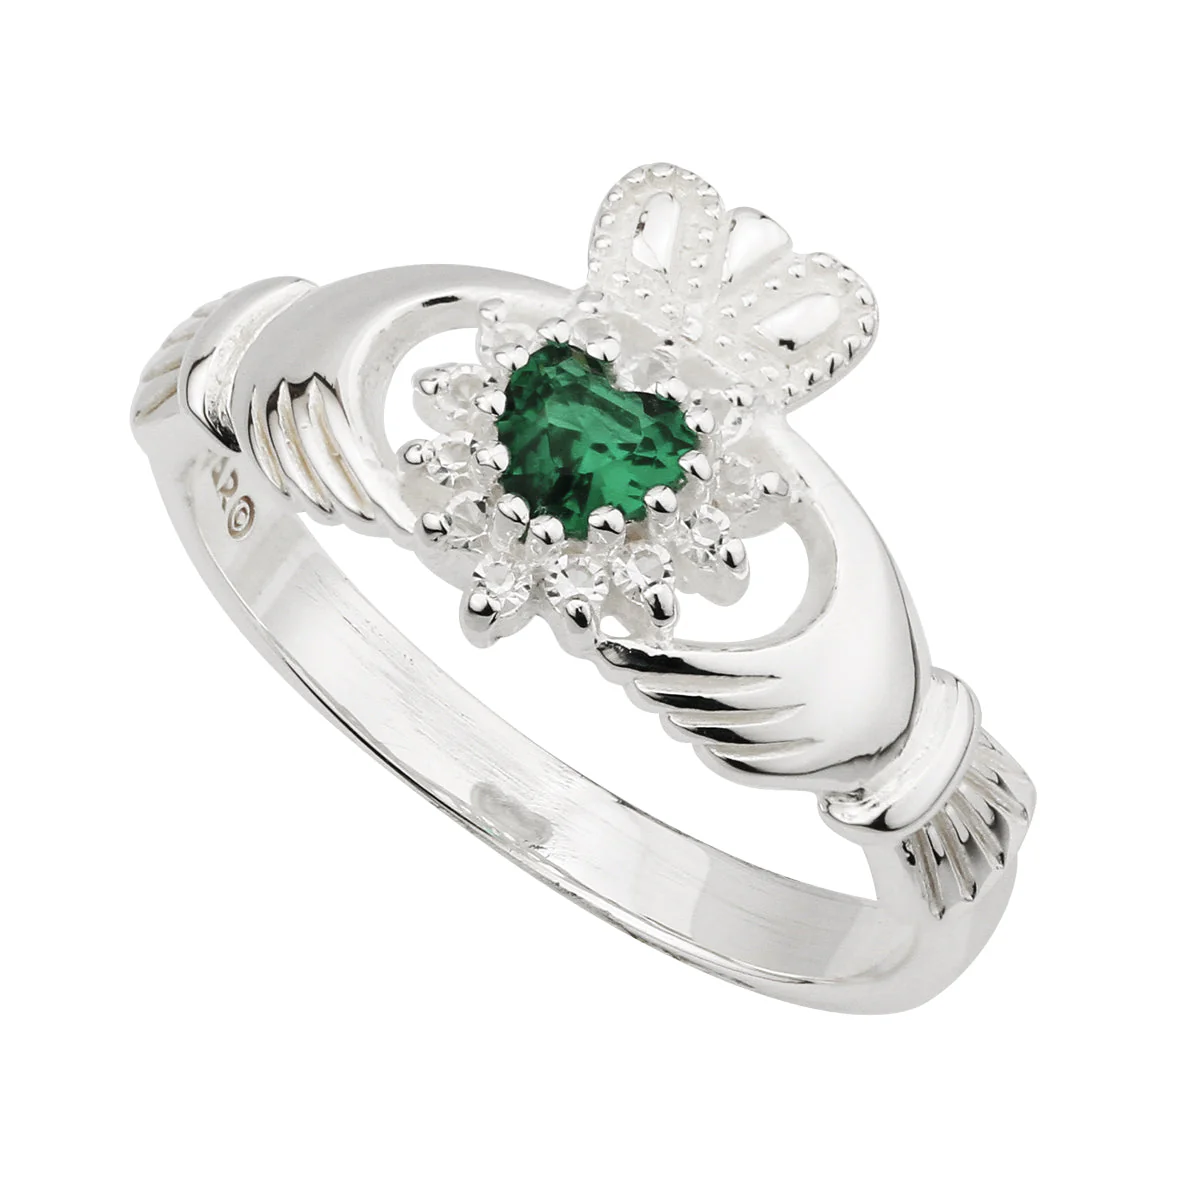 Silver Claddagh Ring With Green Crystal Heart...